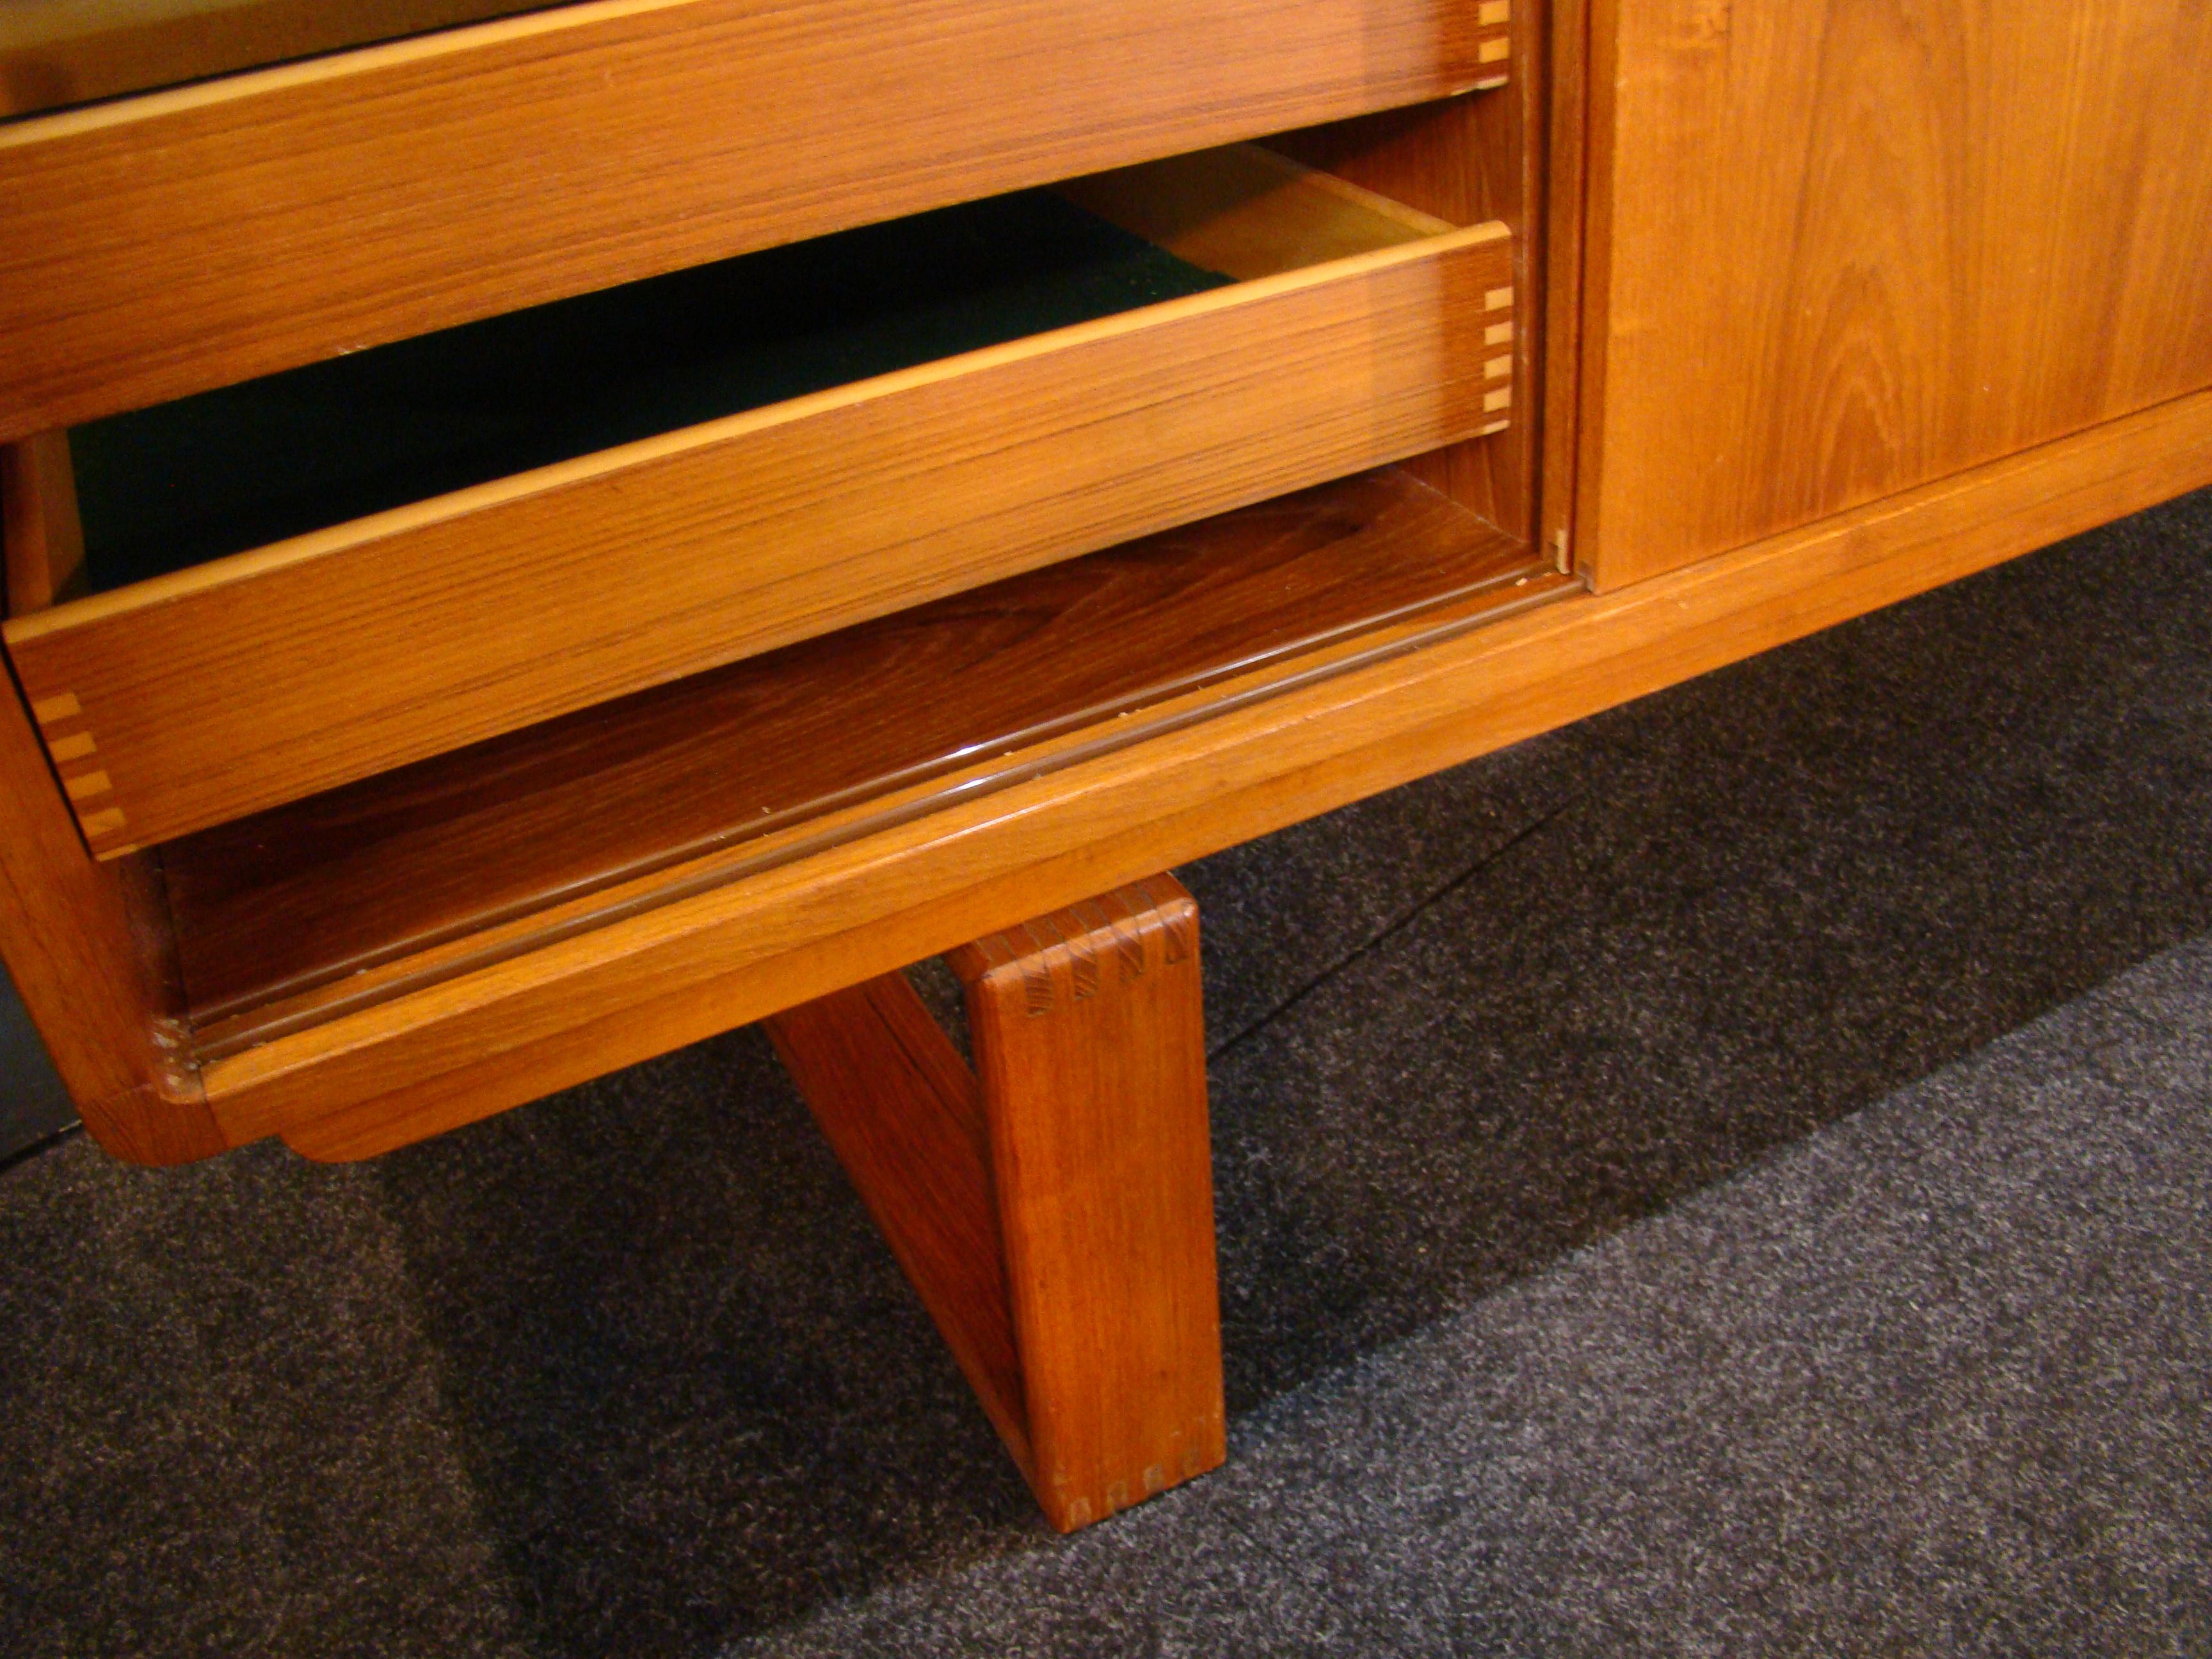 20th Century Danish Teak Credenza with Dovetailed Runners by Klausen and Son, circa 1969